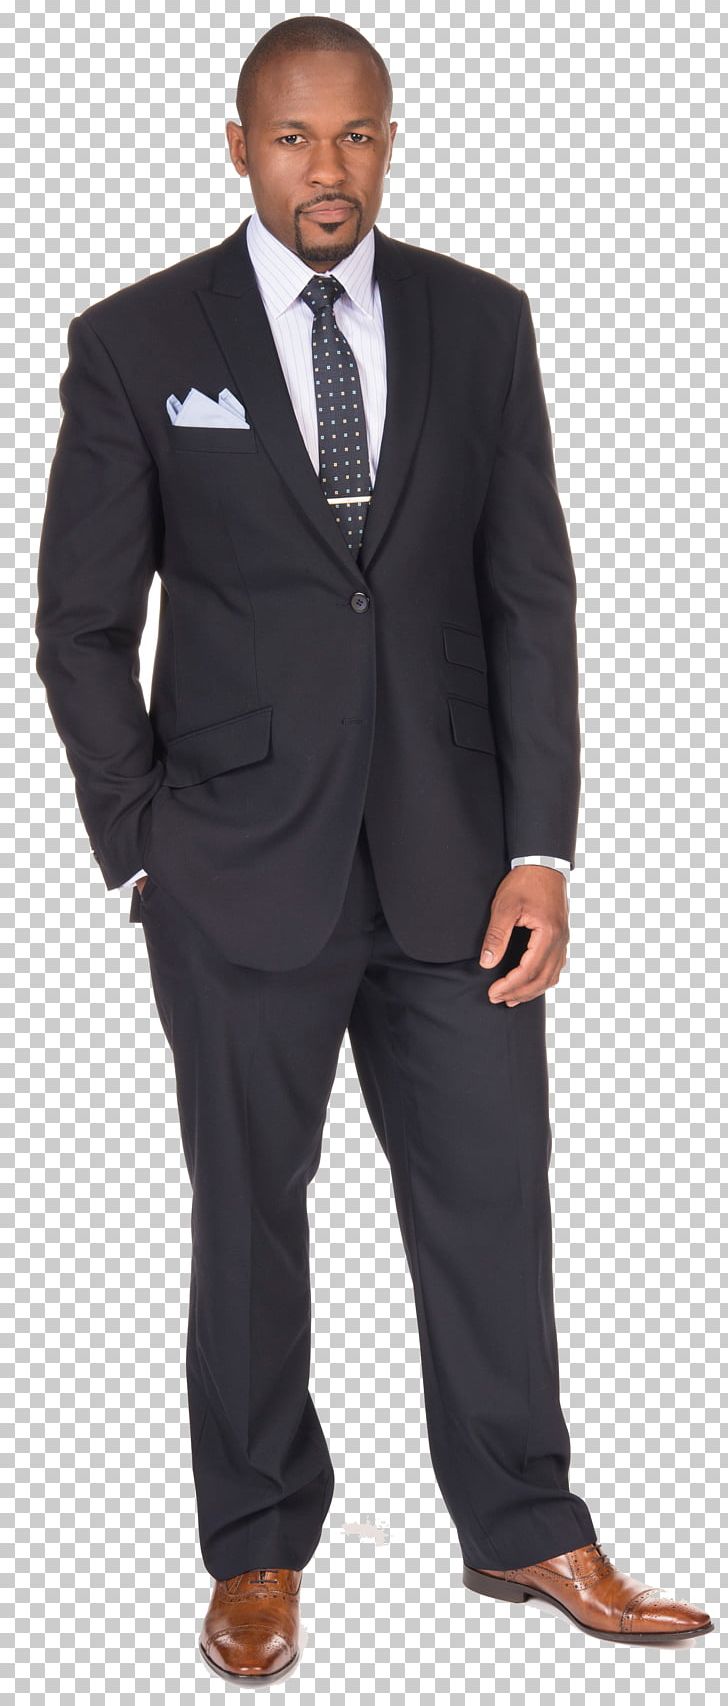 Suit Tuxedo Brooks Brothers Dress Formal Wear PNG, Clipart, Blazer, Brooks Brothers, Businessperson, Clothing, Dress Free PNG Download